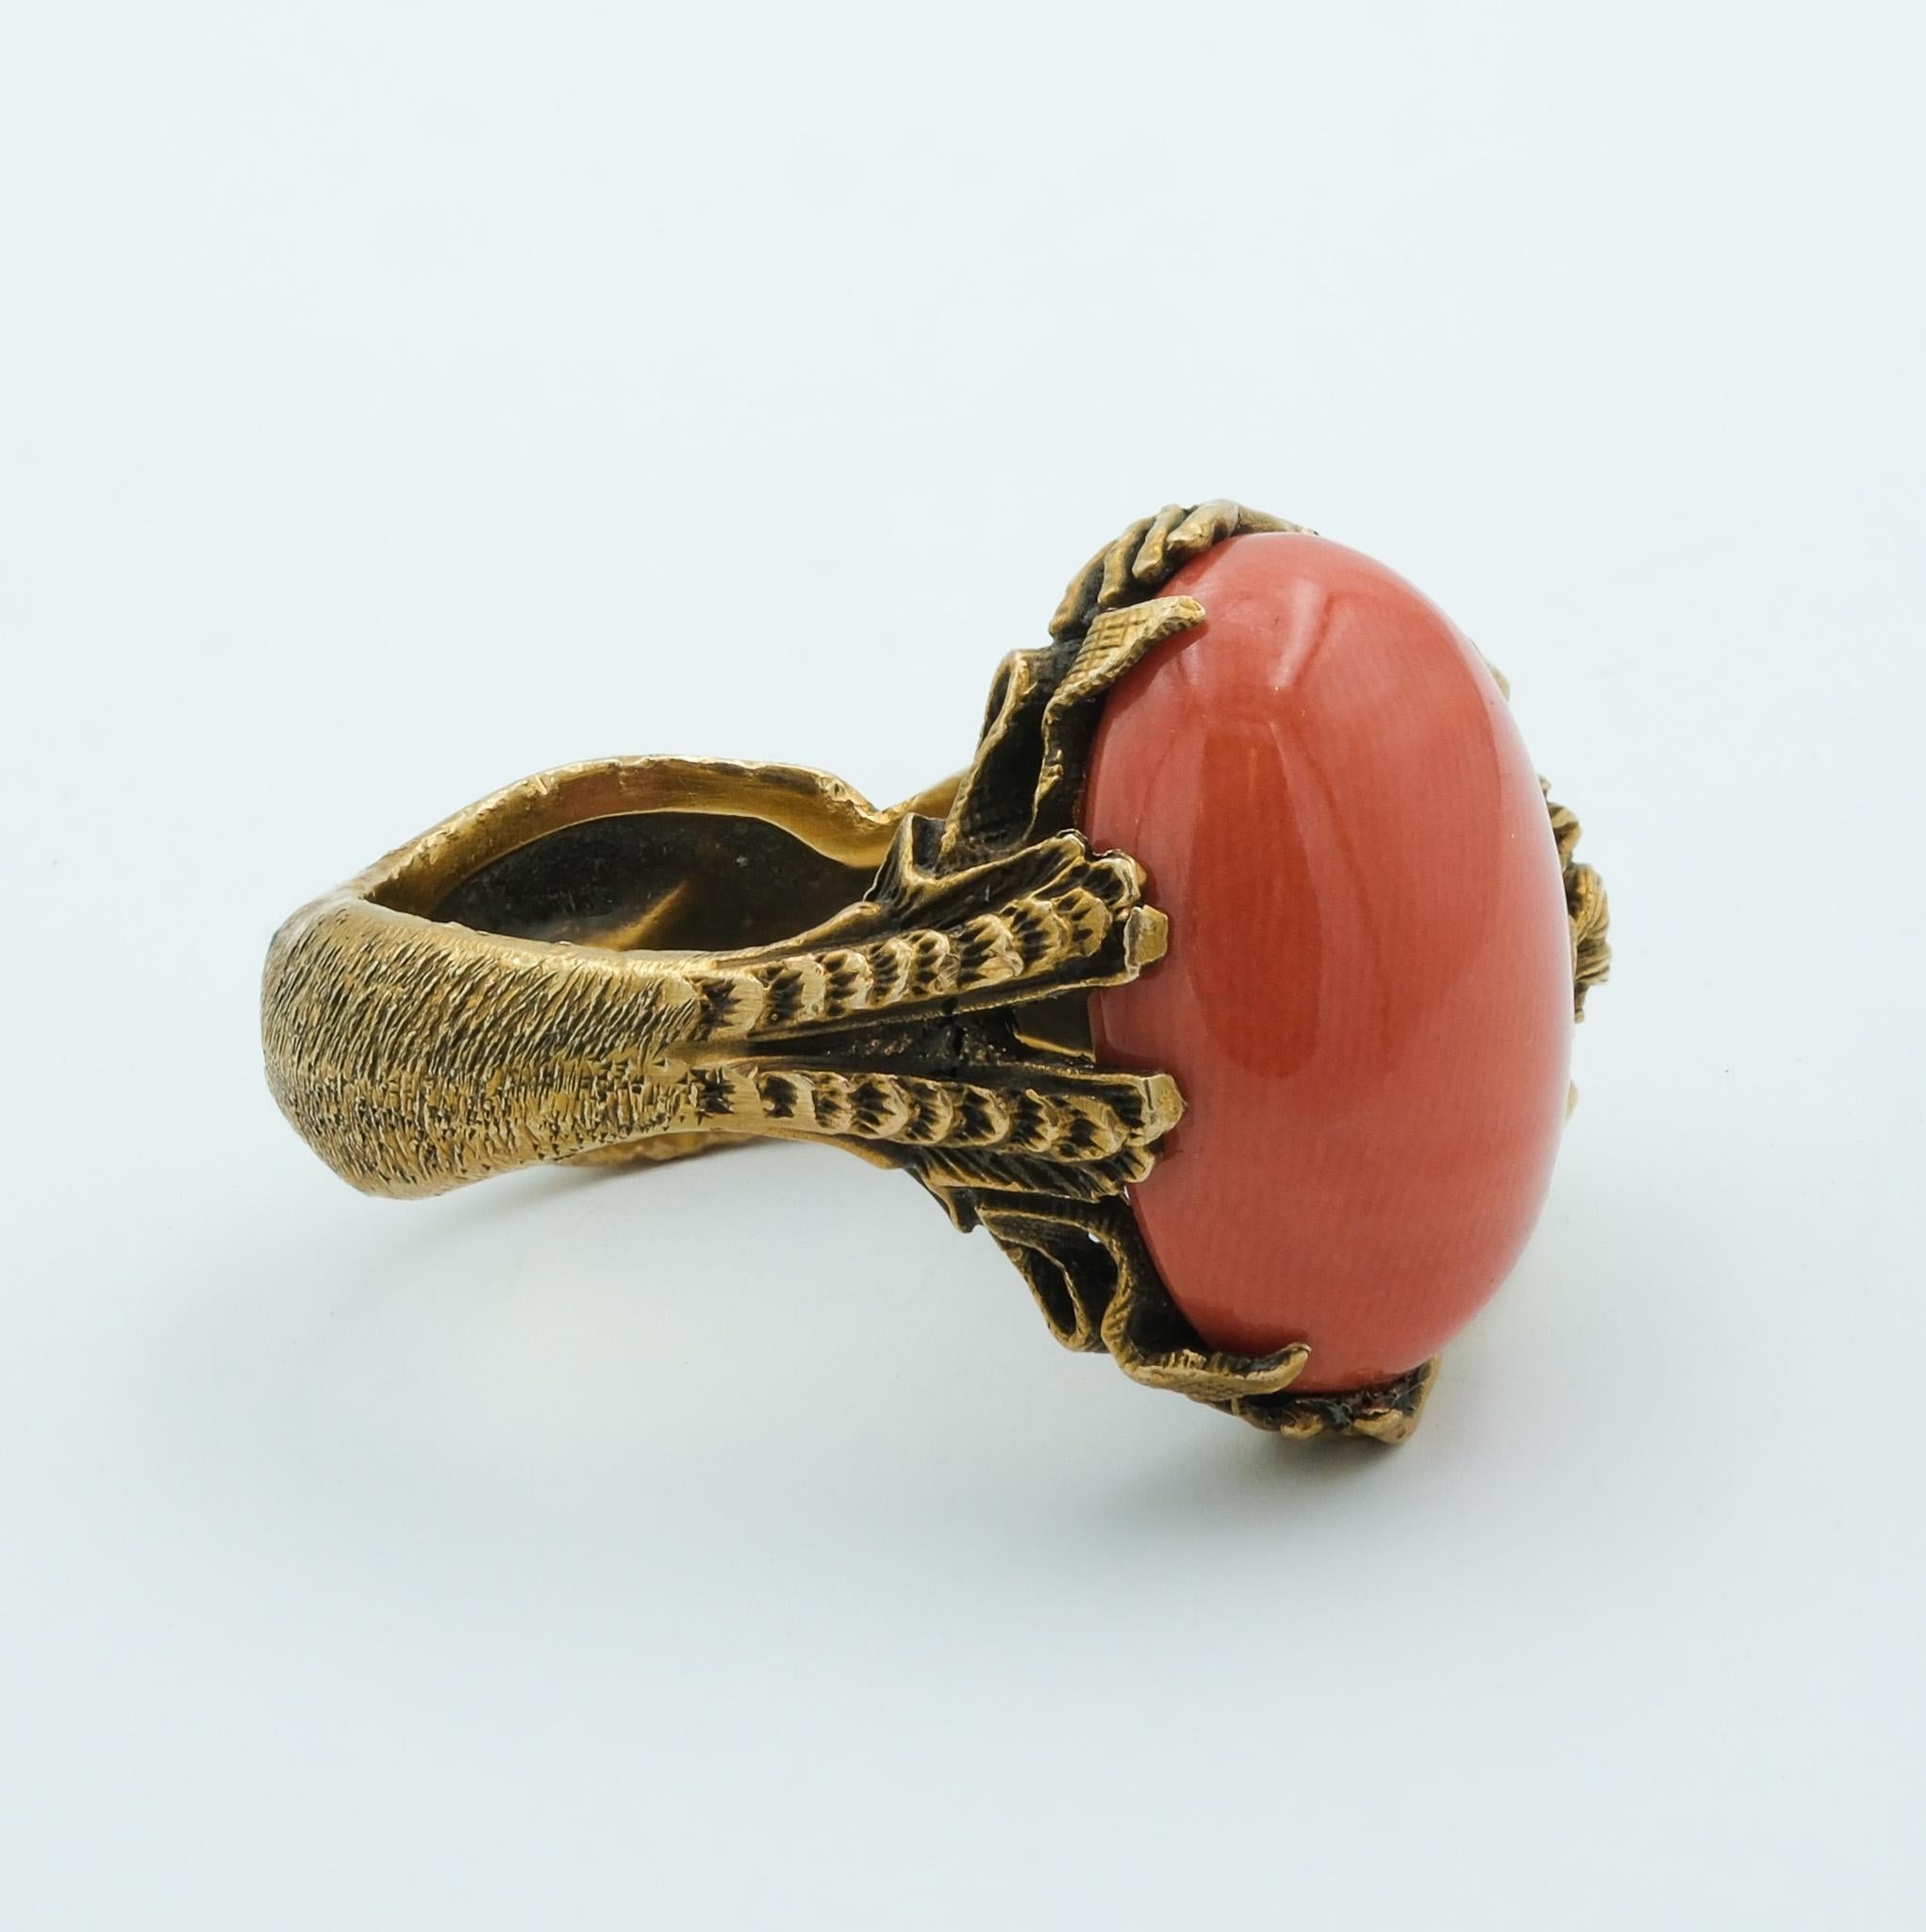 Women's or Men's Figural Artisan Mermaid Lady Ring with 12.8 carat Coral and Garnet Handmade For Sale